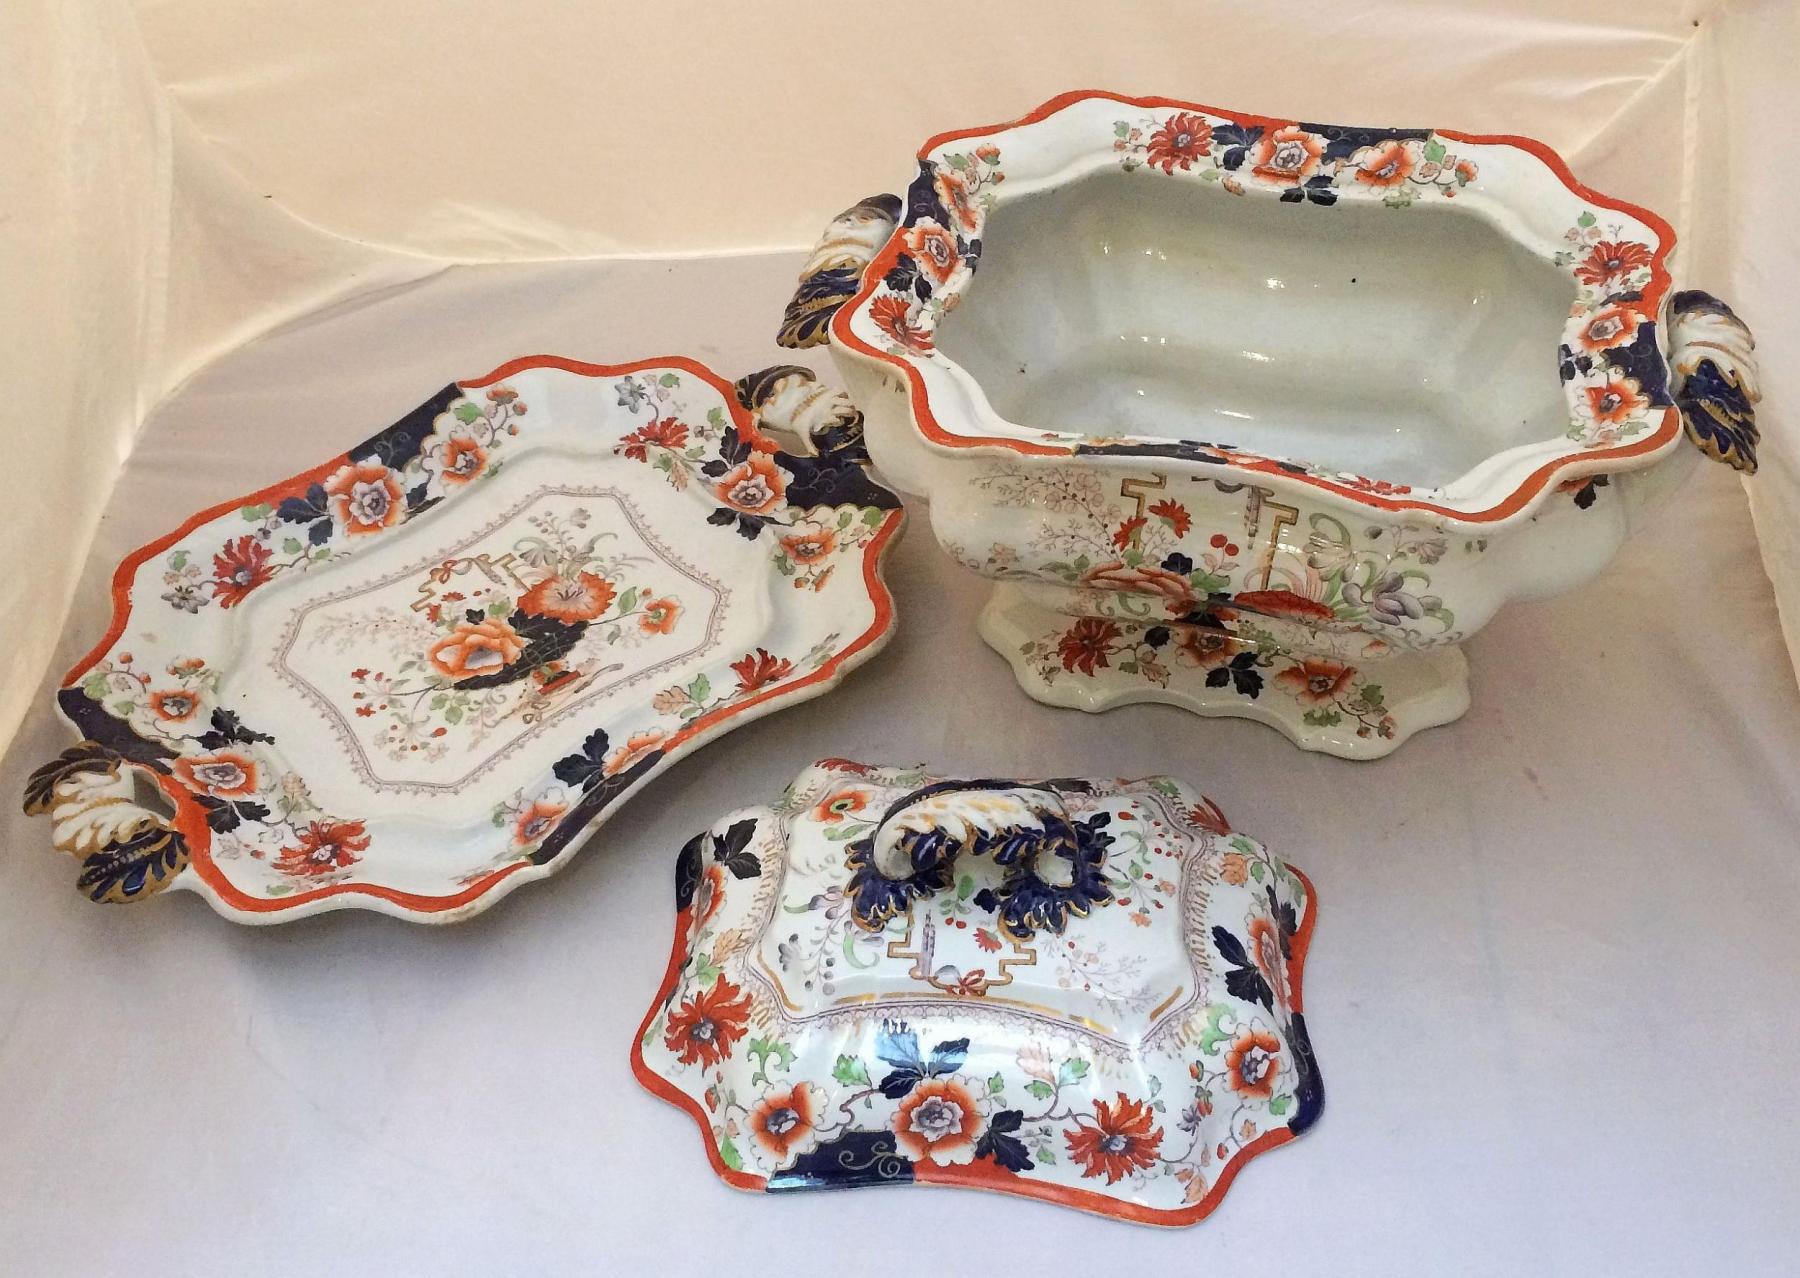 t3433_hicks_meigh_and_johnson_tureen_20